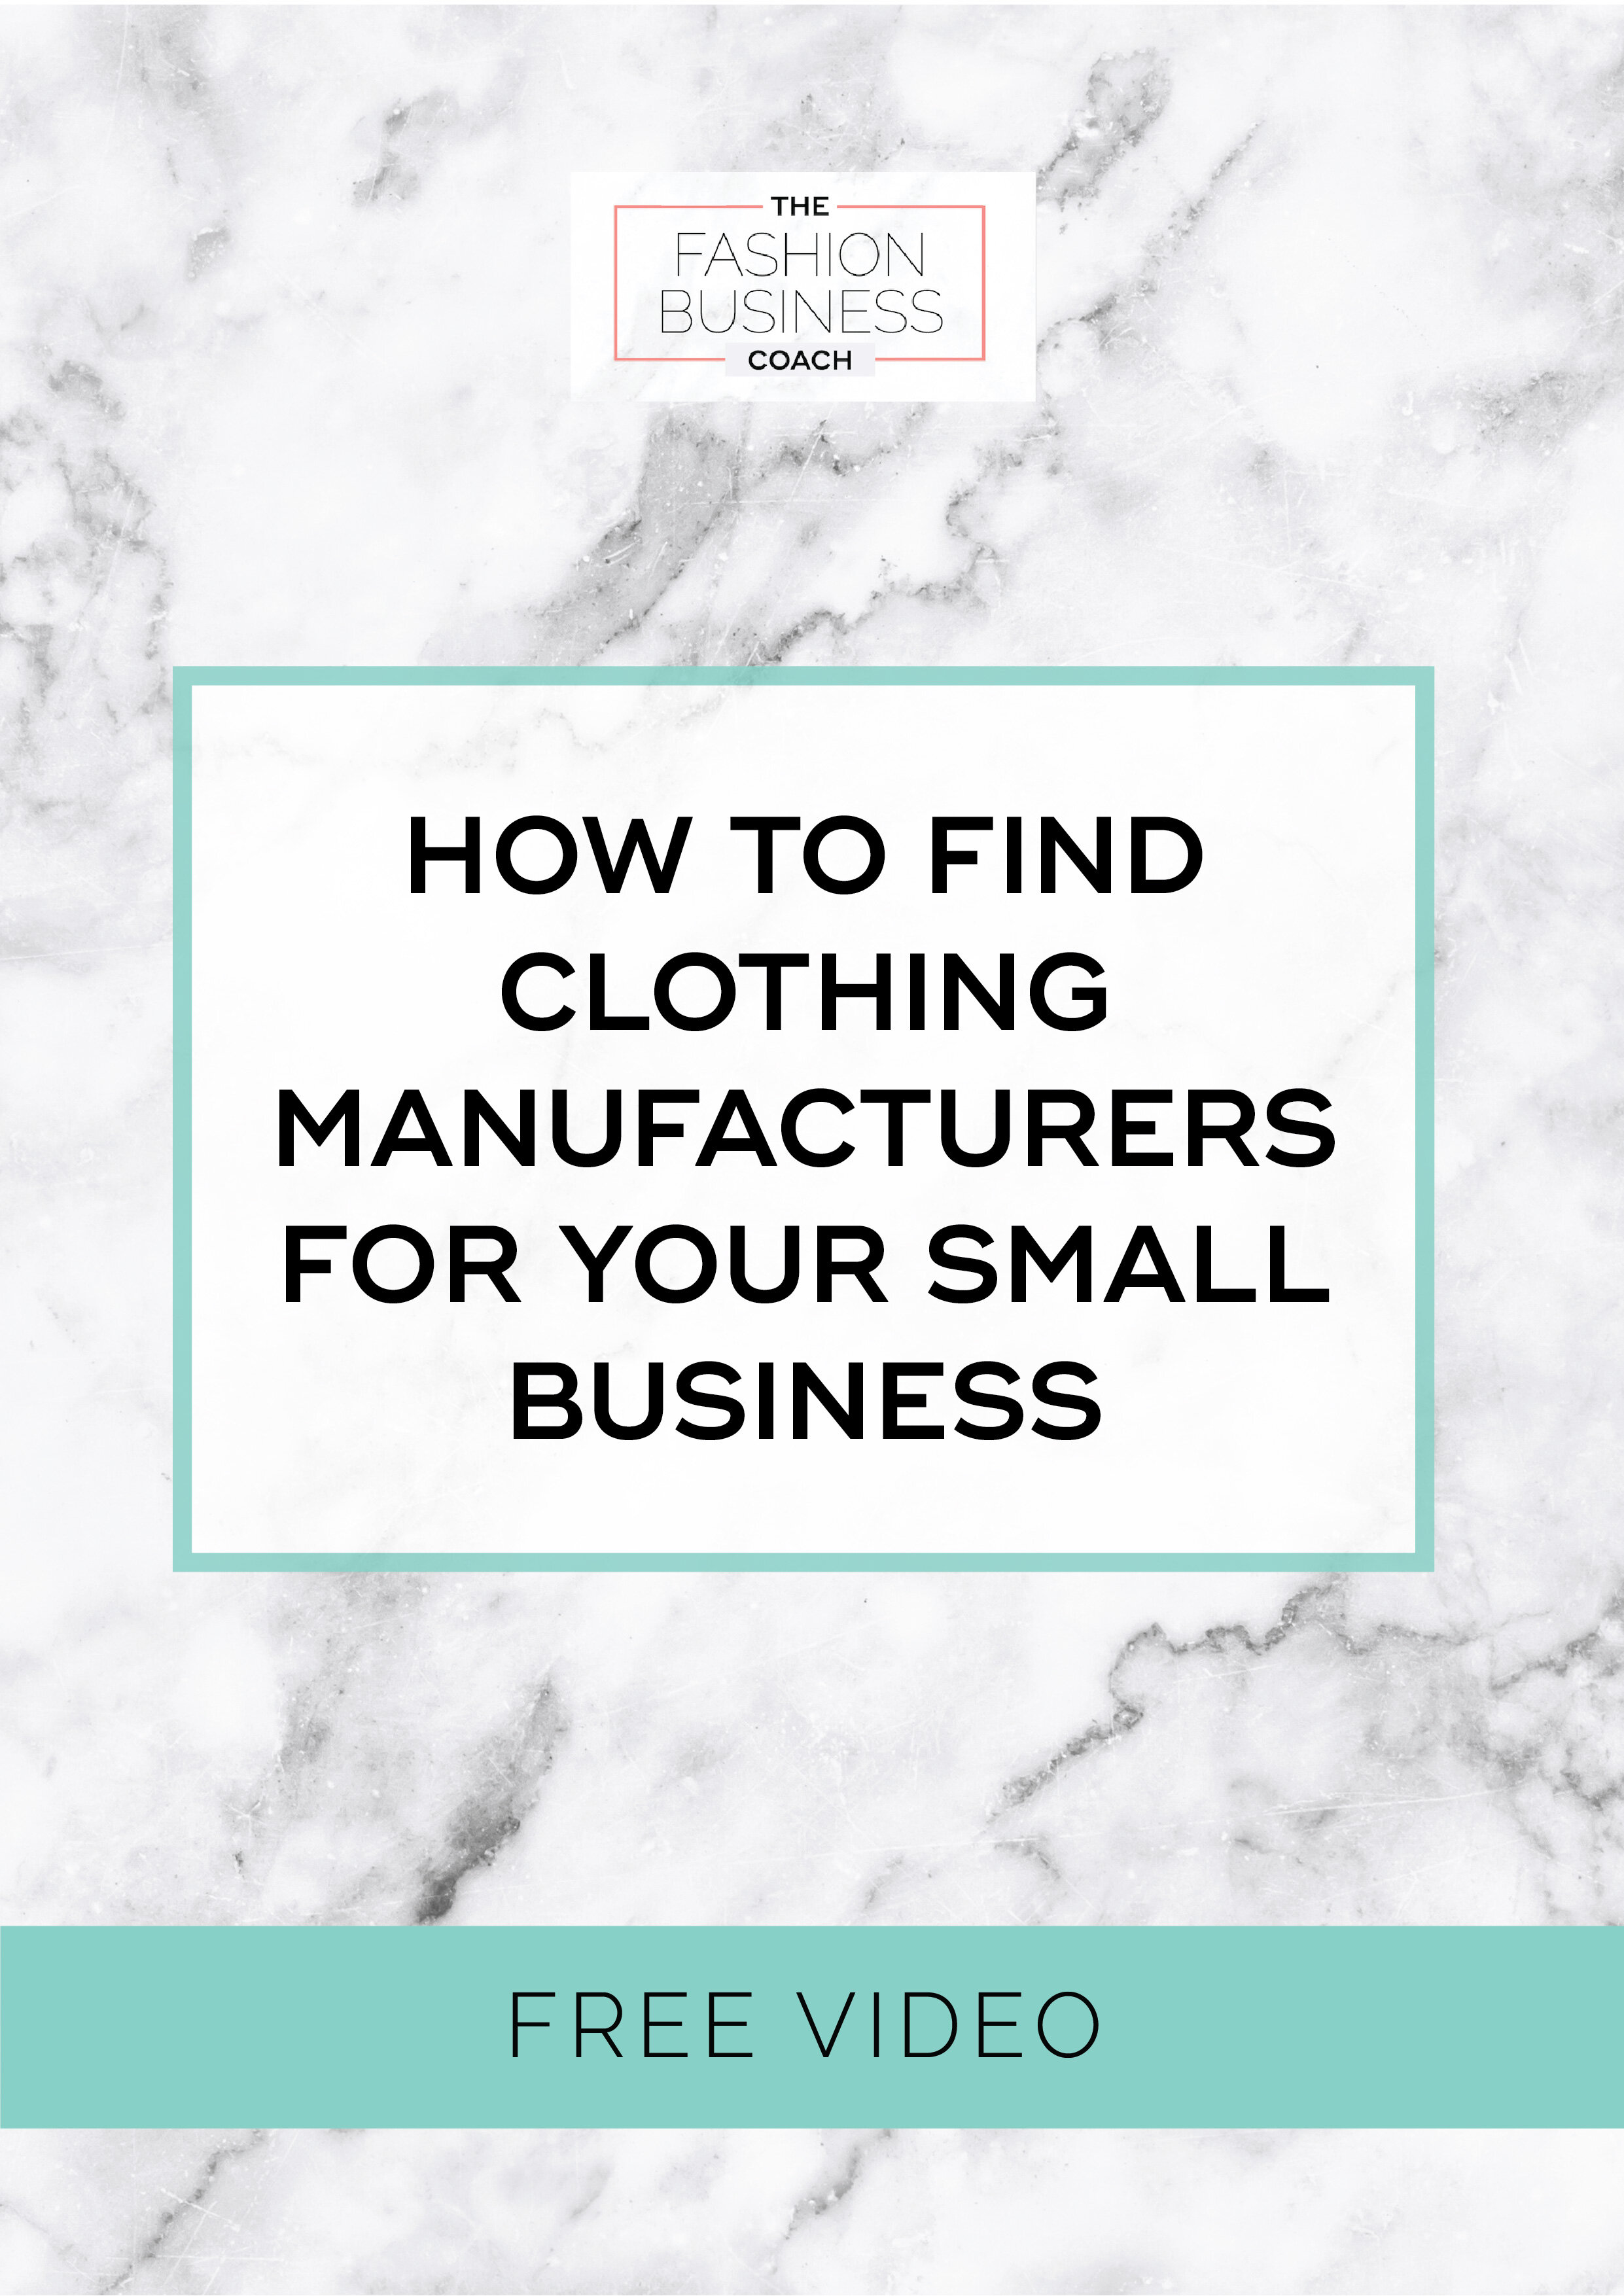 How to Find Clothing Manufacturers for Your Small Business2.jpg